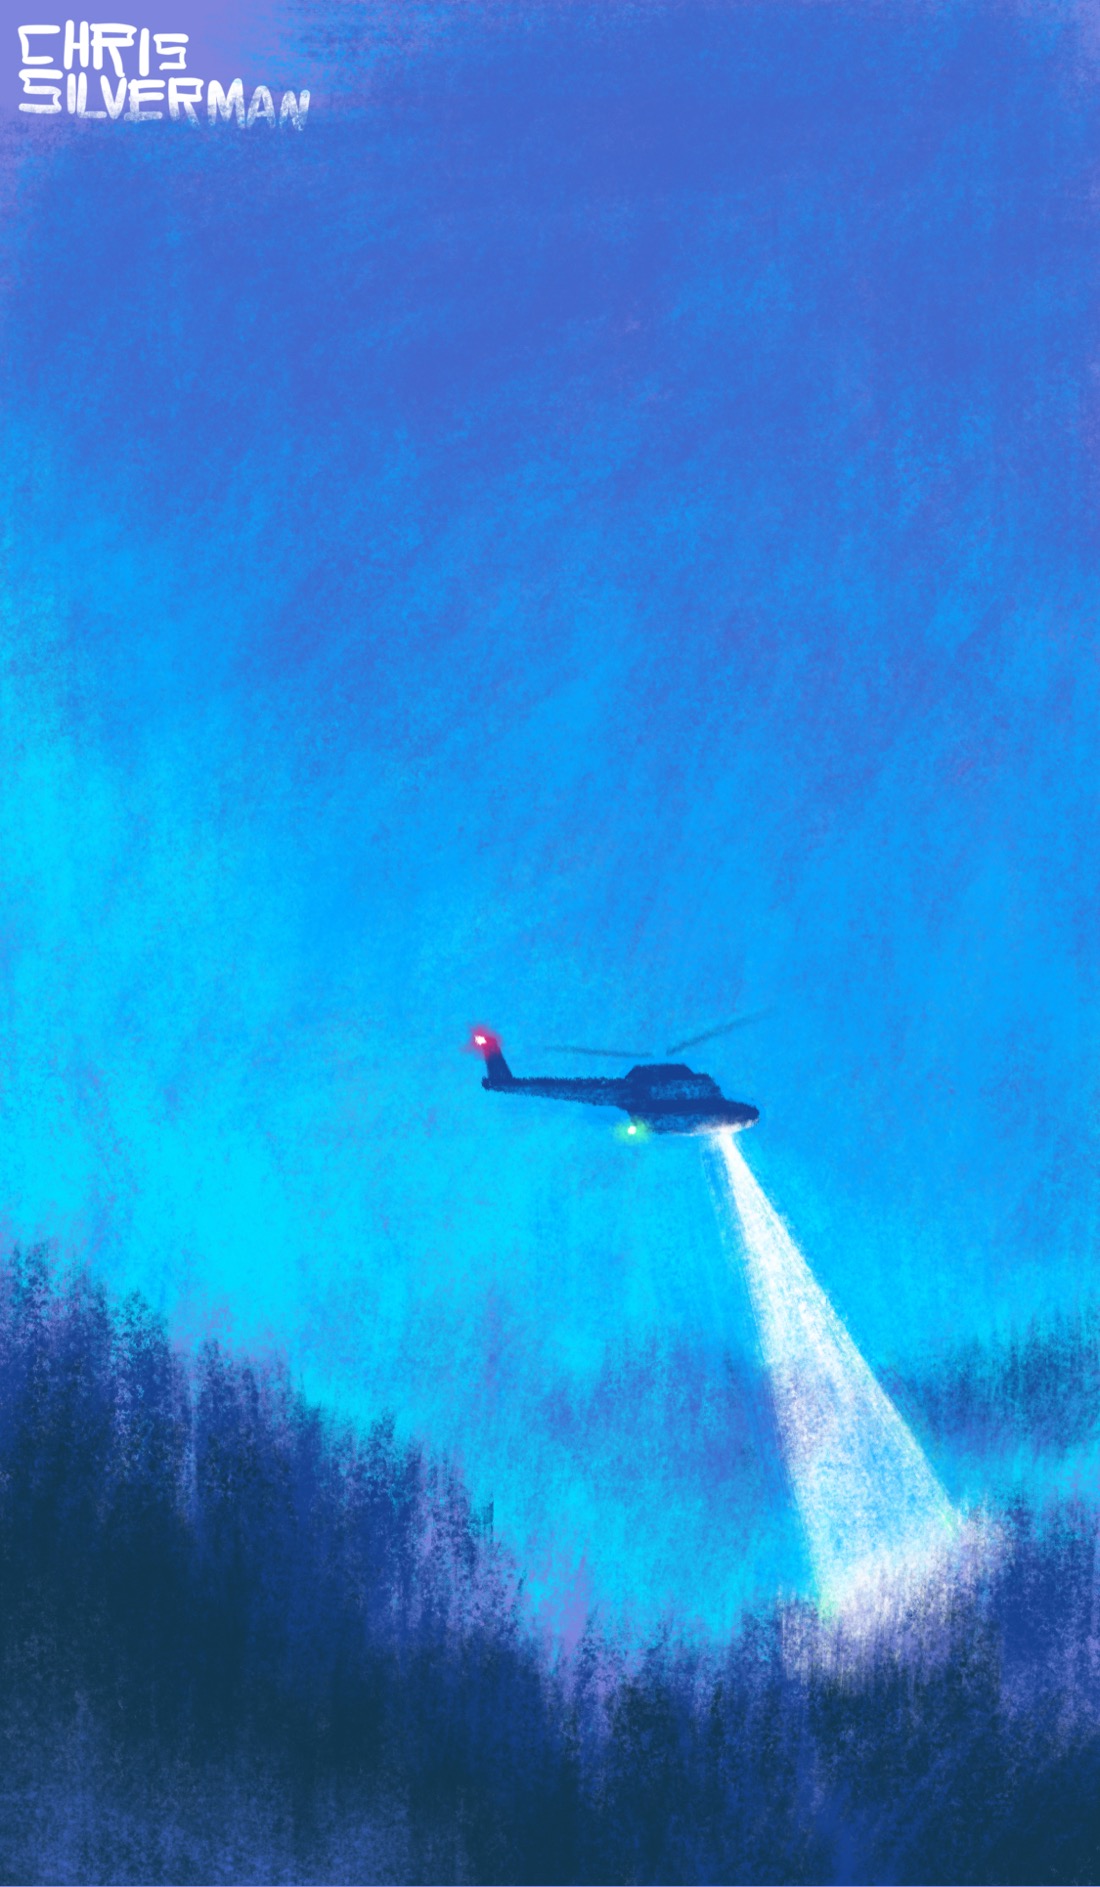 A vast forest: mountain after mountain of heavy trees. The sky is indigo fading into the clear blue of an early dawn. Hovering above the purple trees is a black helicopter, a red light on the tail and a green light on its underbelly. The helicopter is pointing the brilliant white cone of a spotlight down into the trees below. Someone is looking for something.